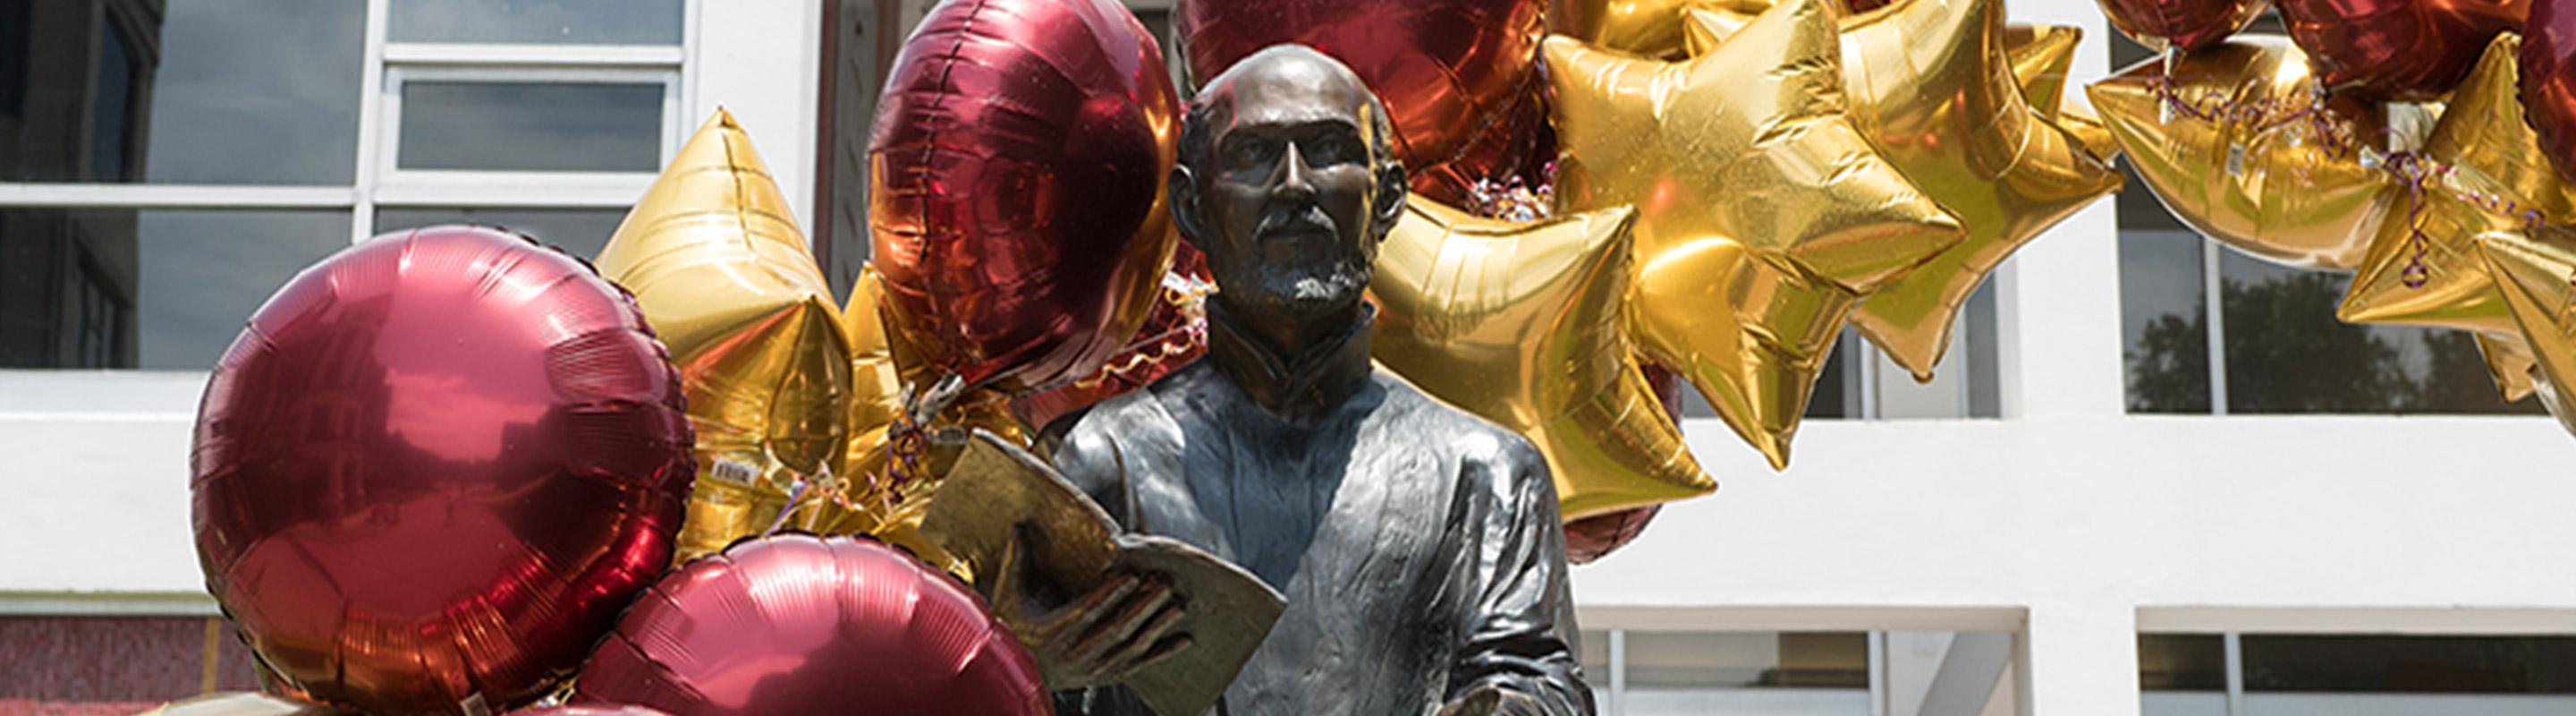 STraight on shot of Ignatius statue with maroon and gold balloons